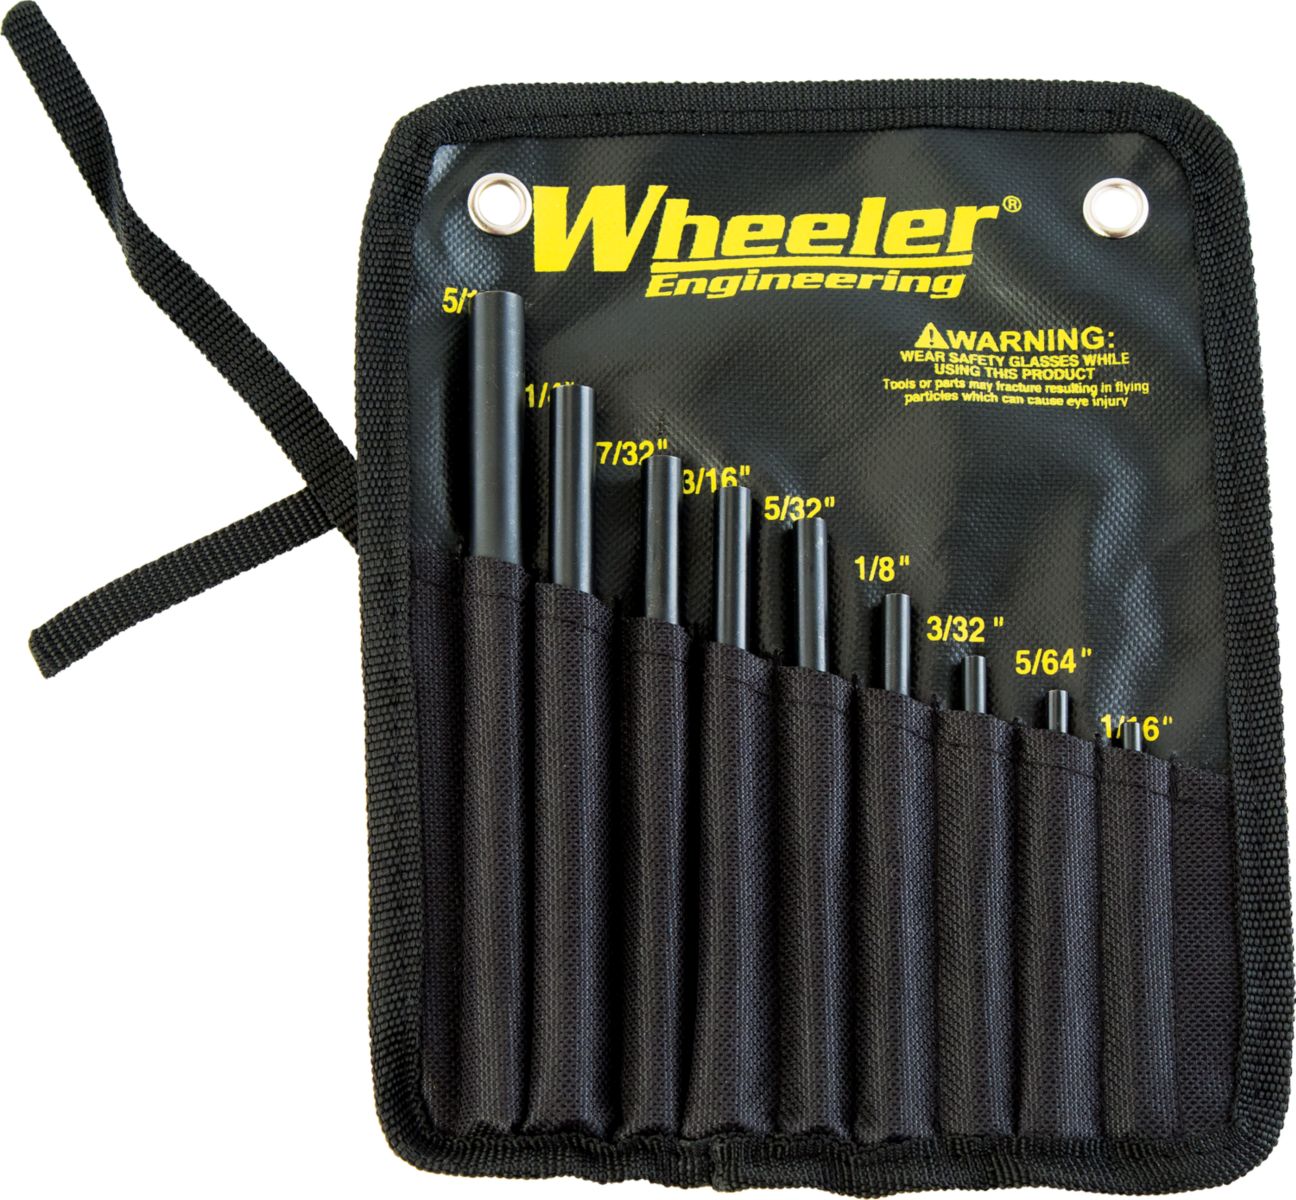 Wheeler Roll-Pin Starter Punch Set - $24.99 (Free 2-Day Shipping over $50)